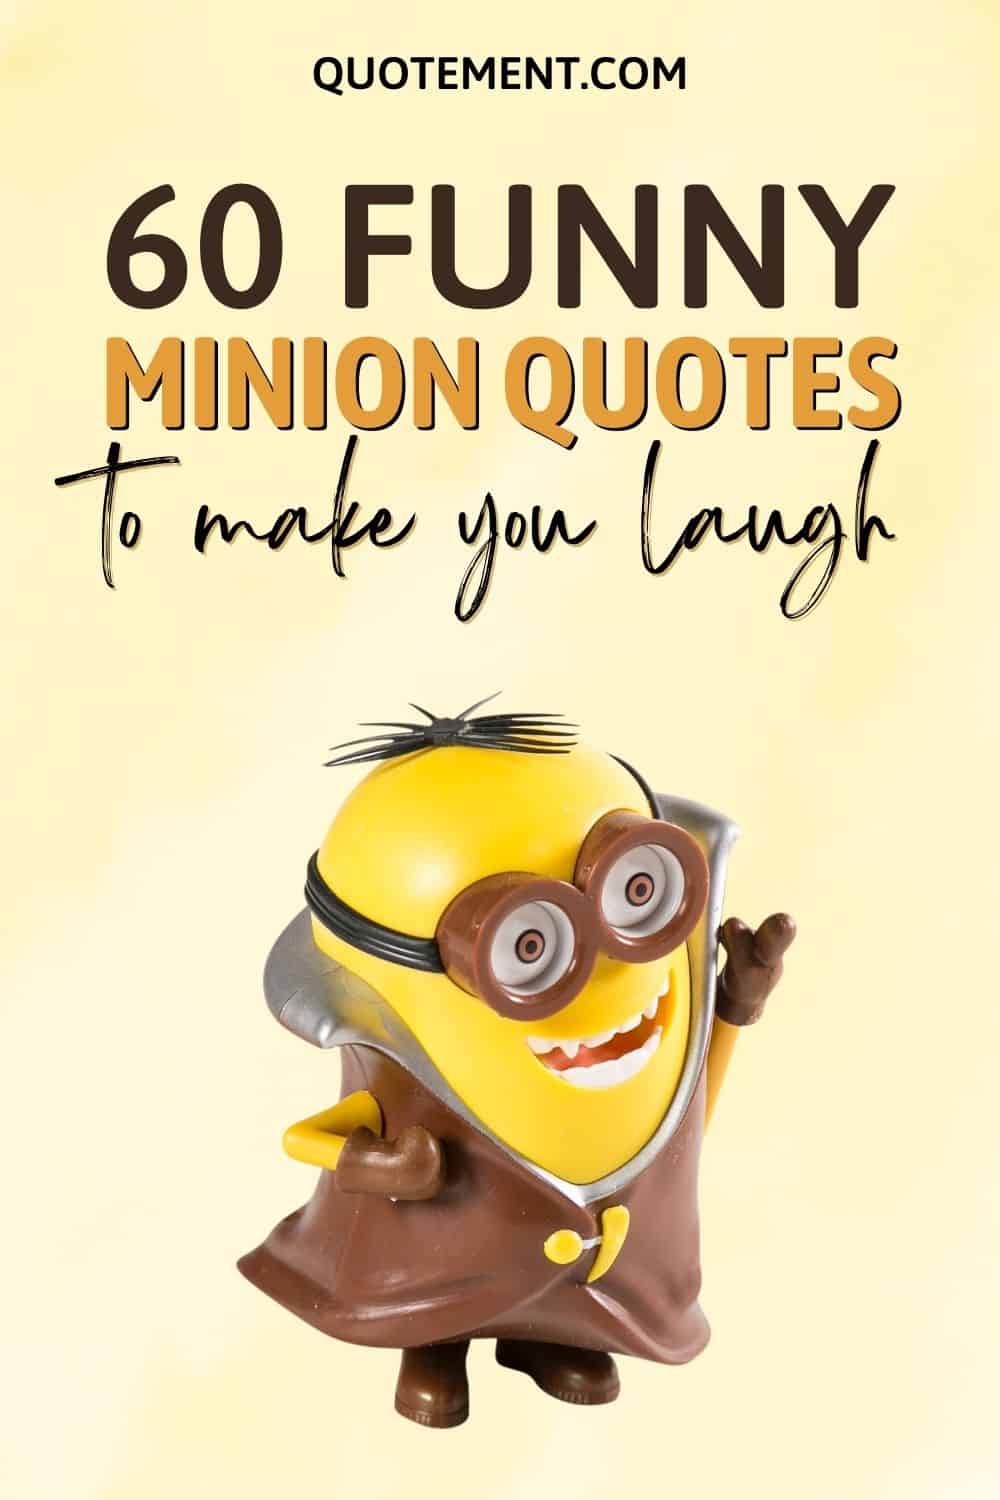 60 Funny Minion Quotes To Make You (Re)Watch The Movies